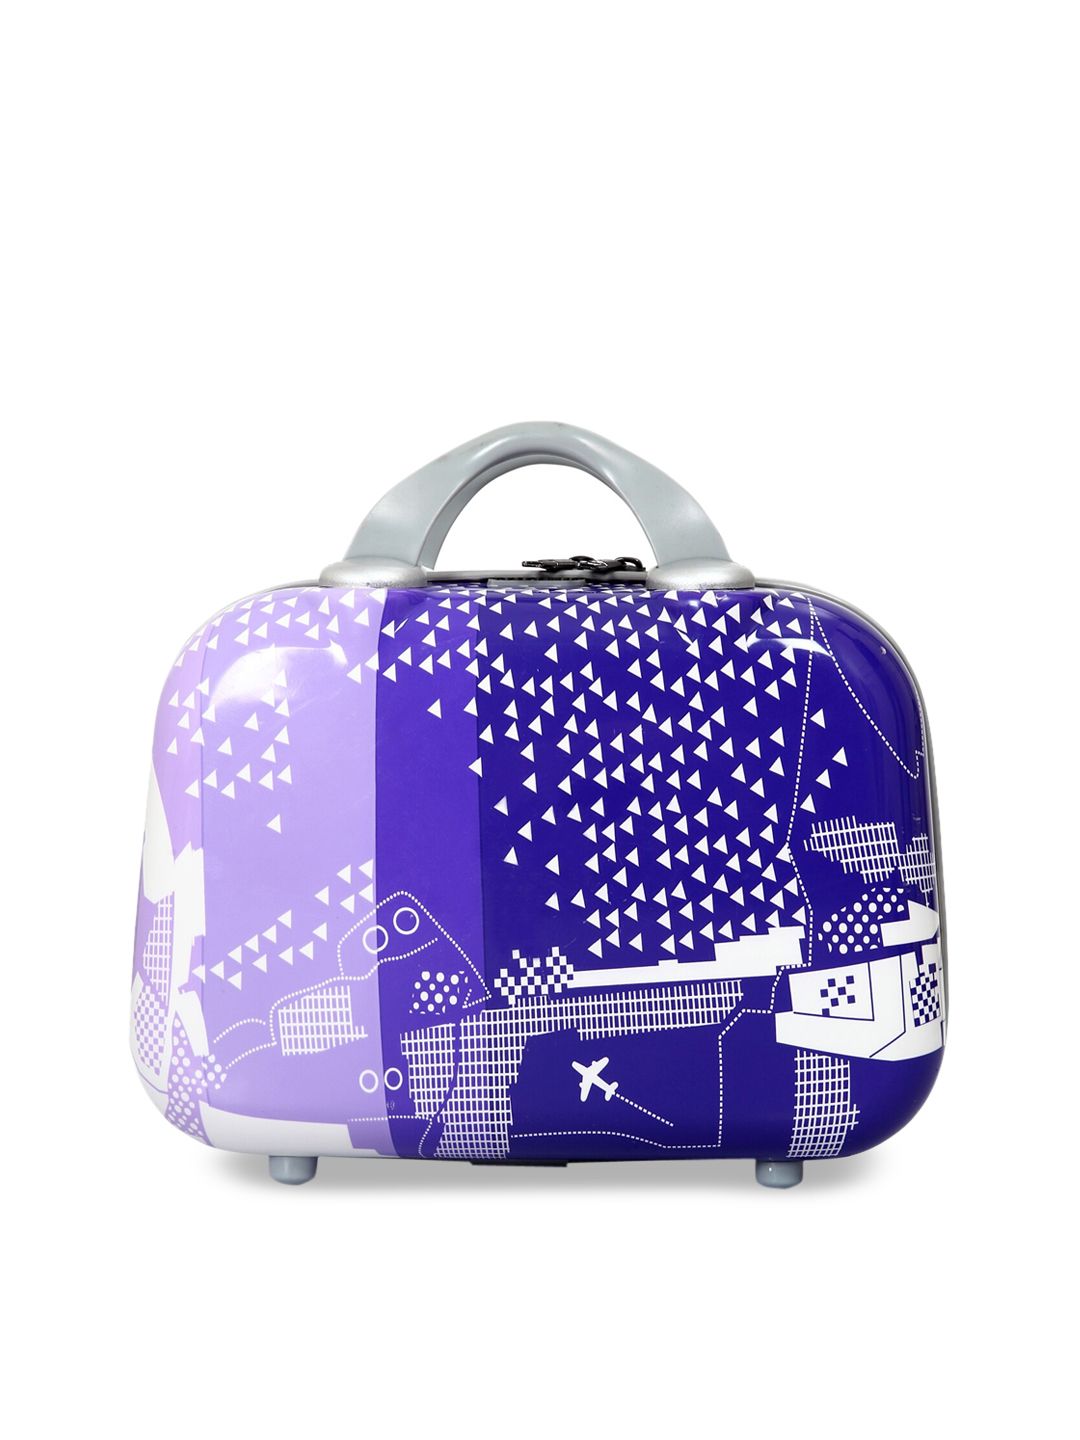 Polo Class Blue Printed Vanity Bag Price in India